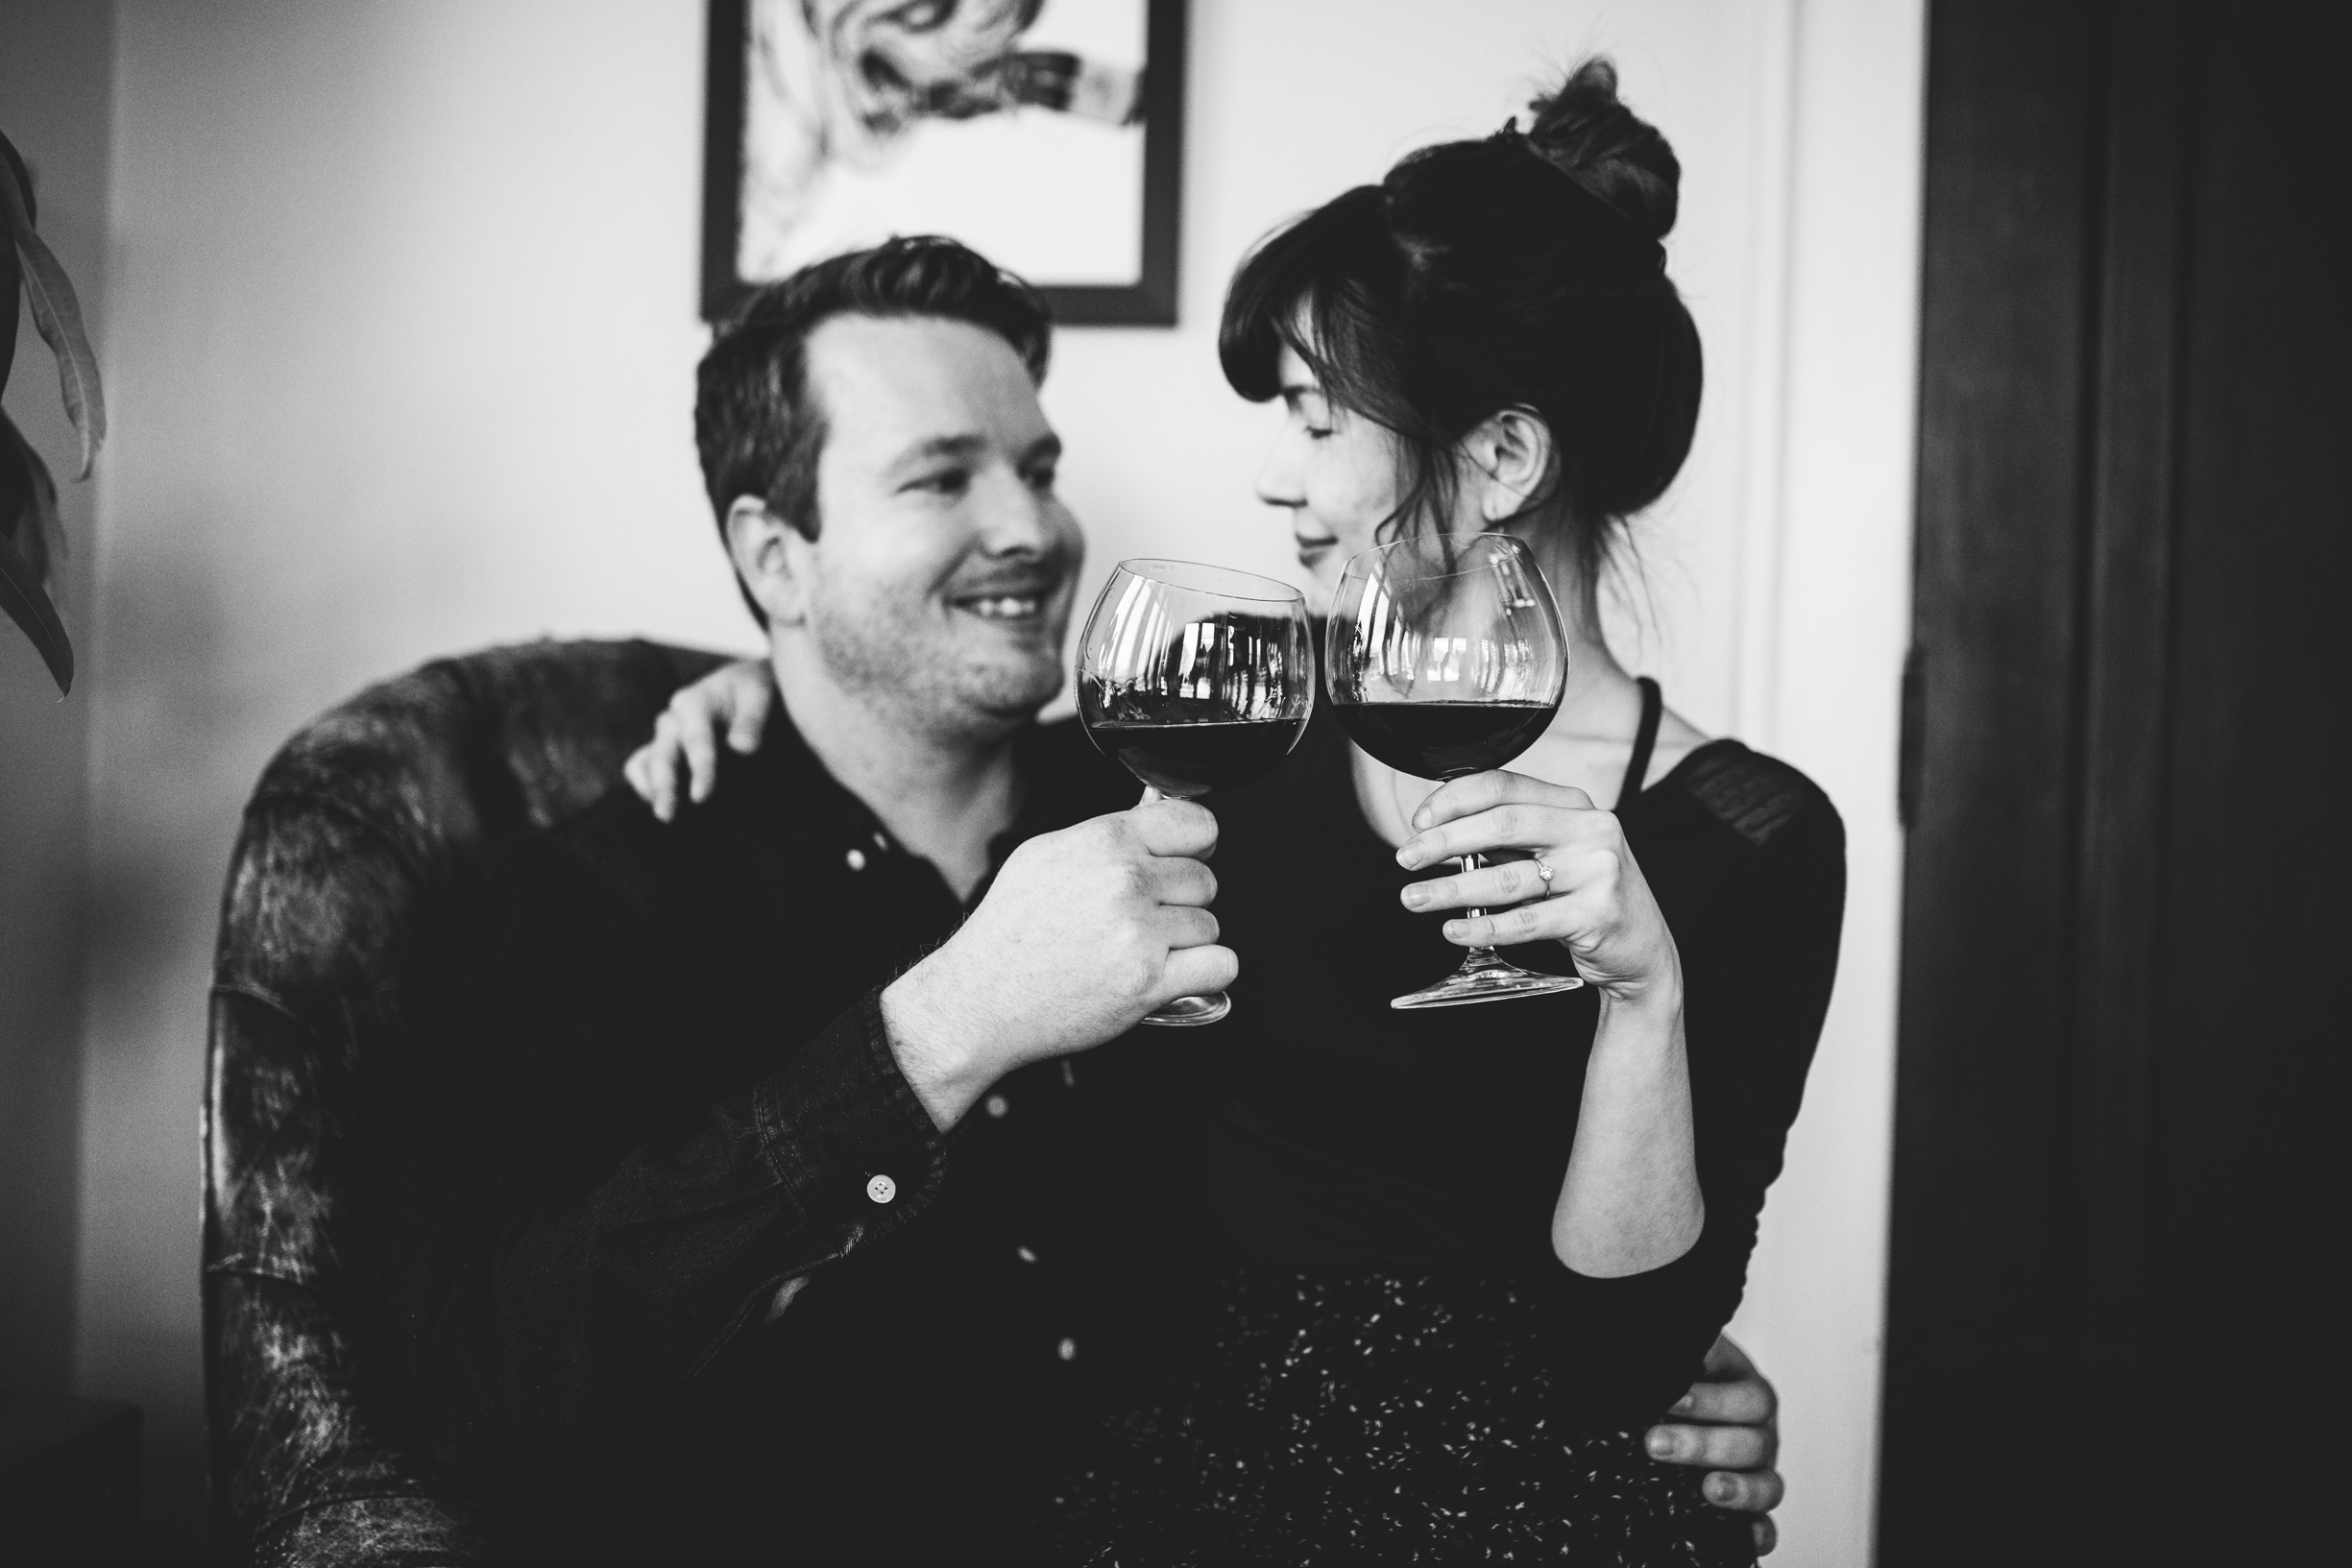 louisville-engagement-photographer-record-store-in-home-session-crystal-ludwick-photo (14 of 53).jpg